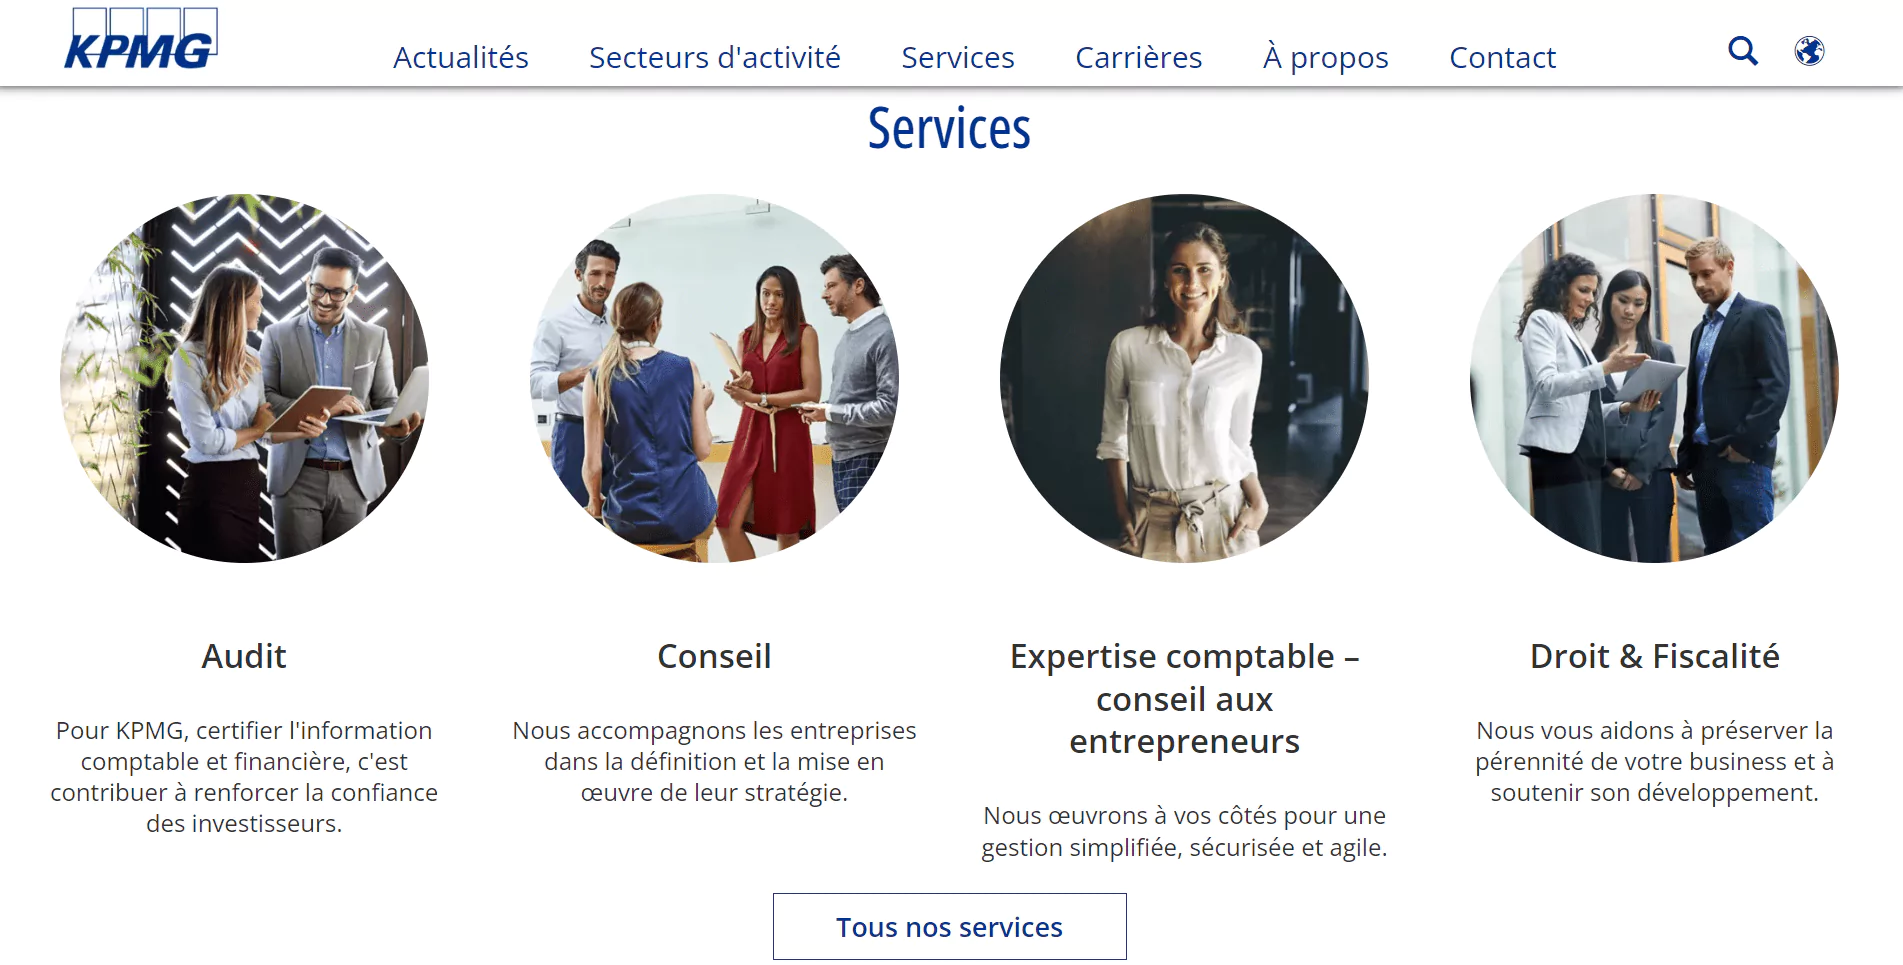 baccana-digital-consulting-client-kpmg-services